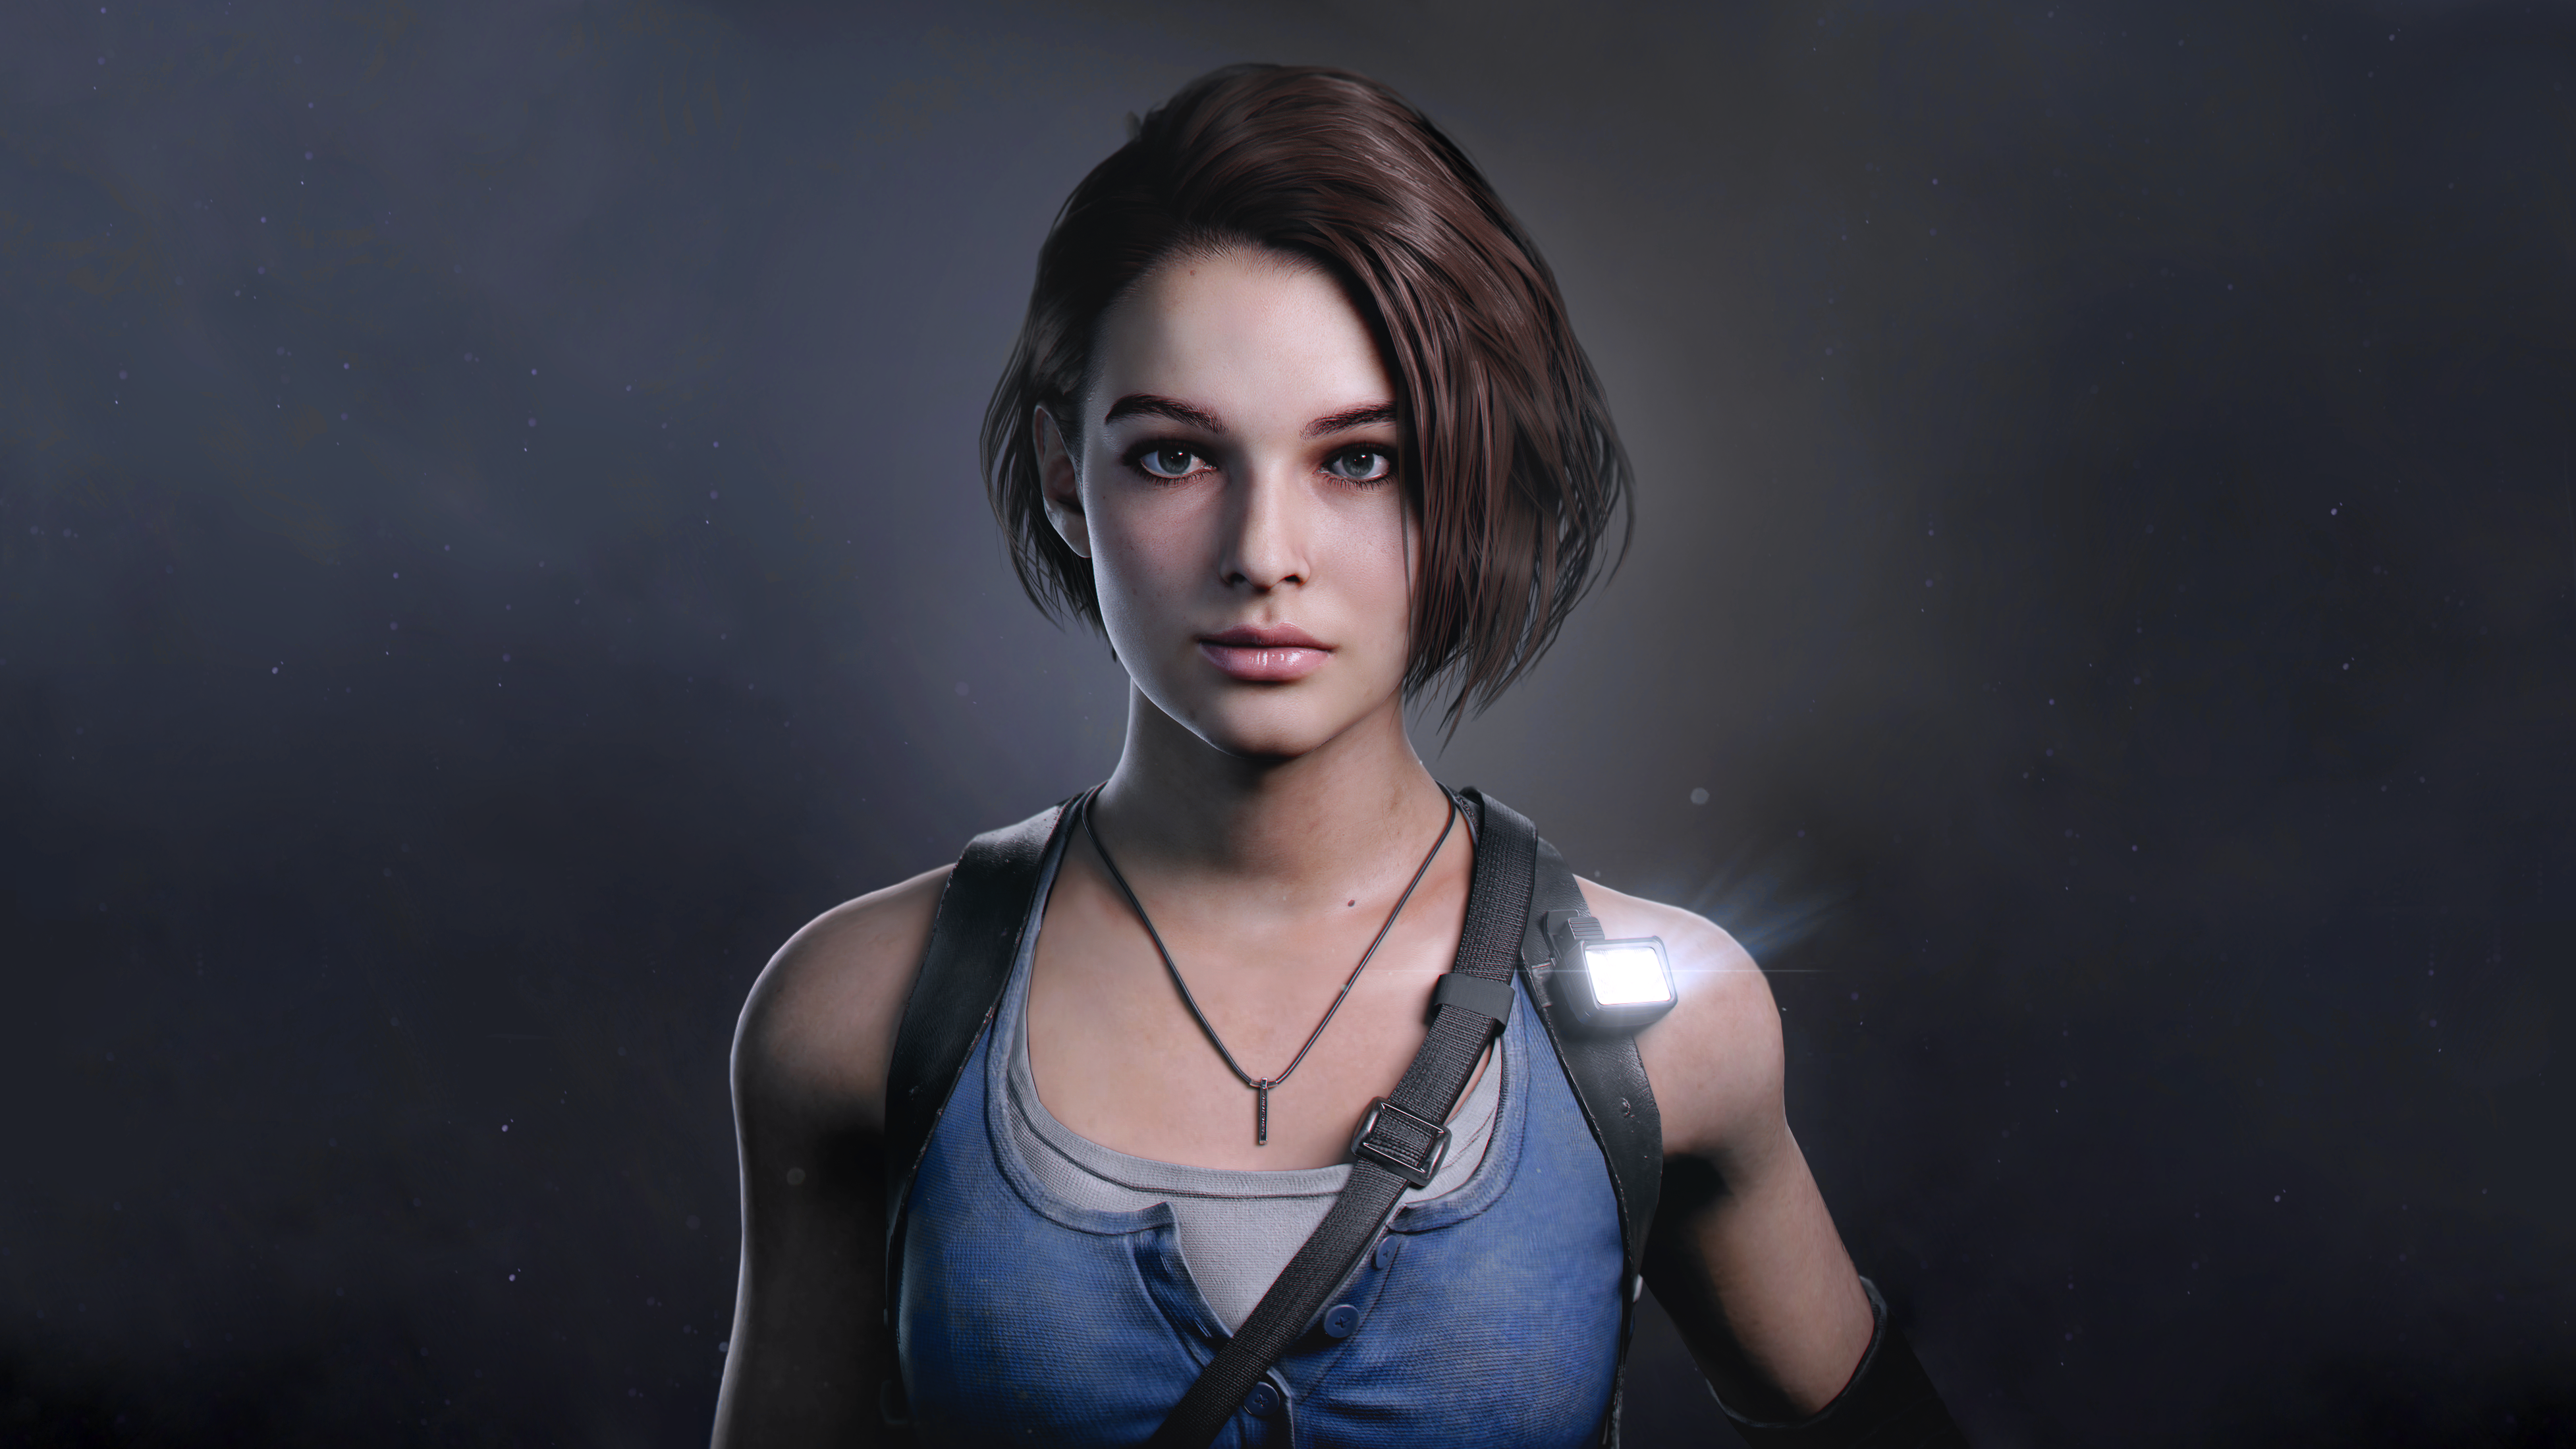 Download Jill Valentine, The Resilient Heroine From Resident Evil Series  Wallpaper